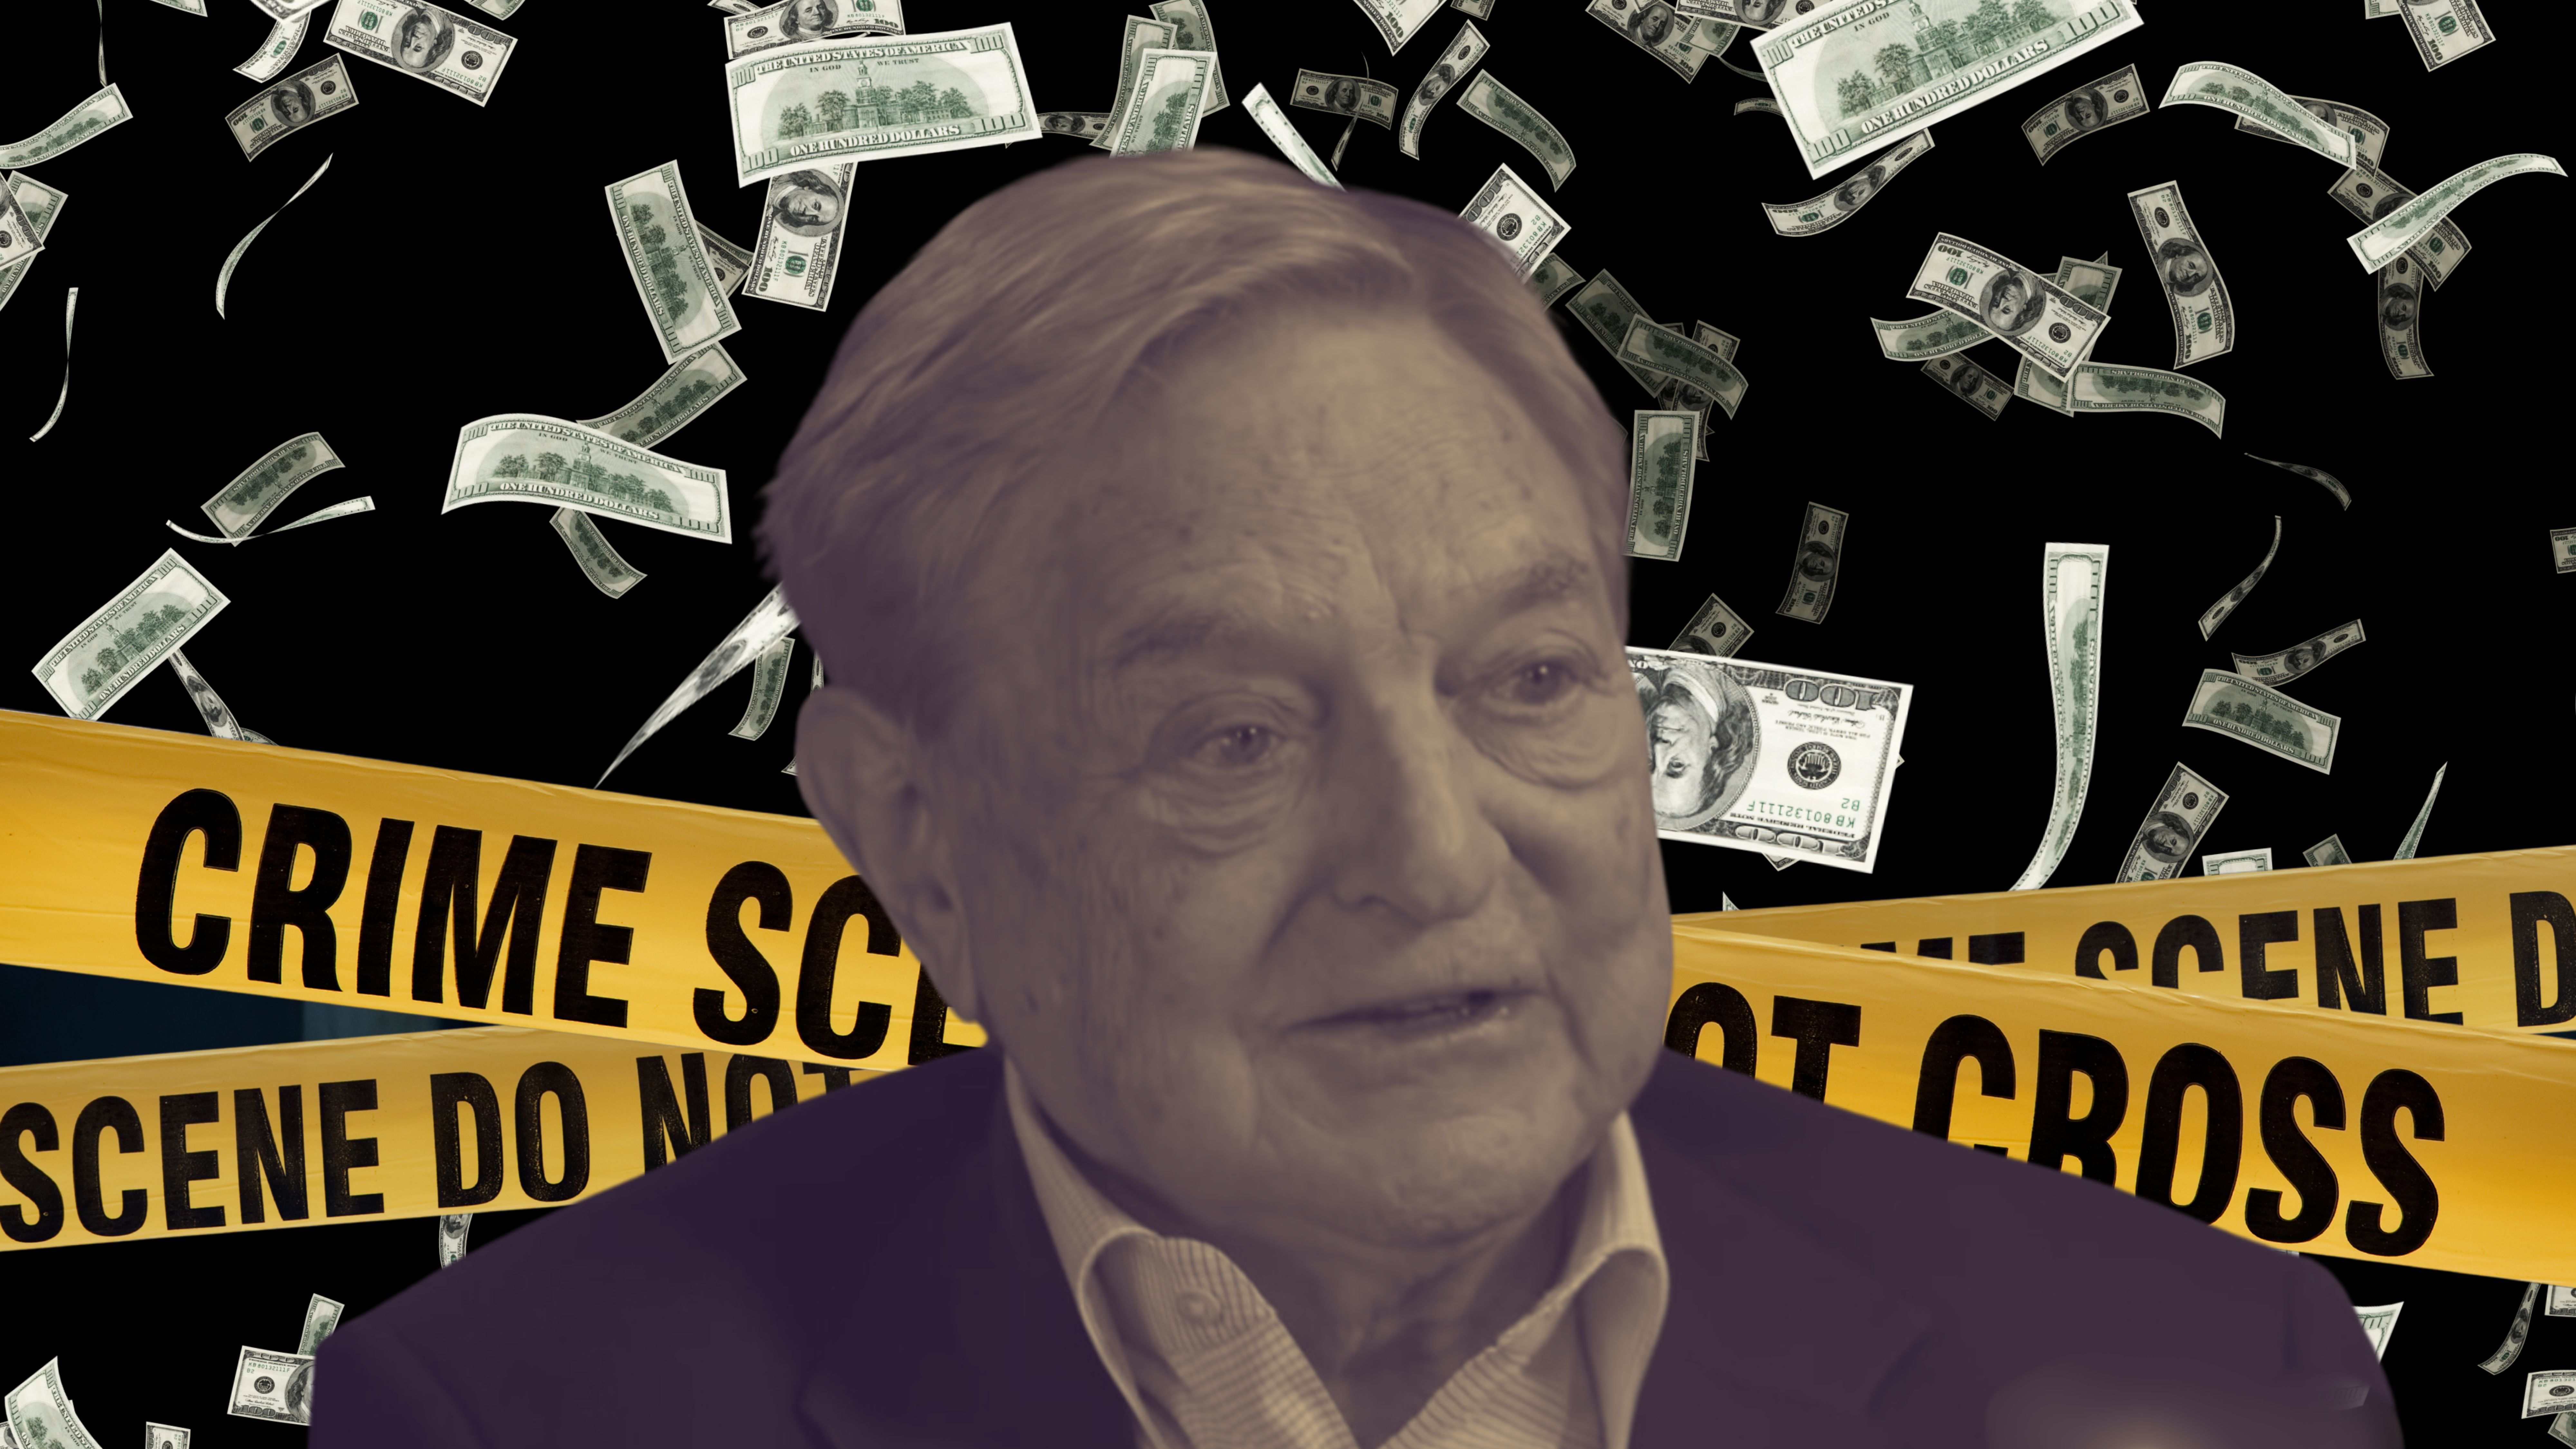 Soros Nonprofit Bailed Out Violent Criminal Charged In Texas Shooting Spree